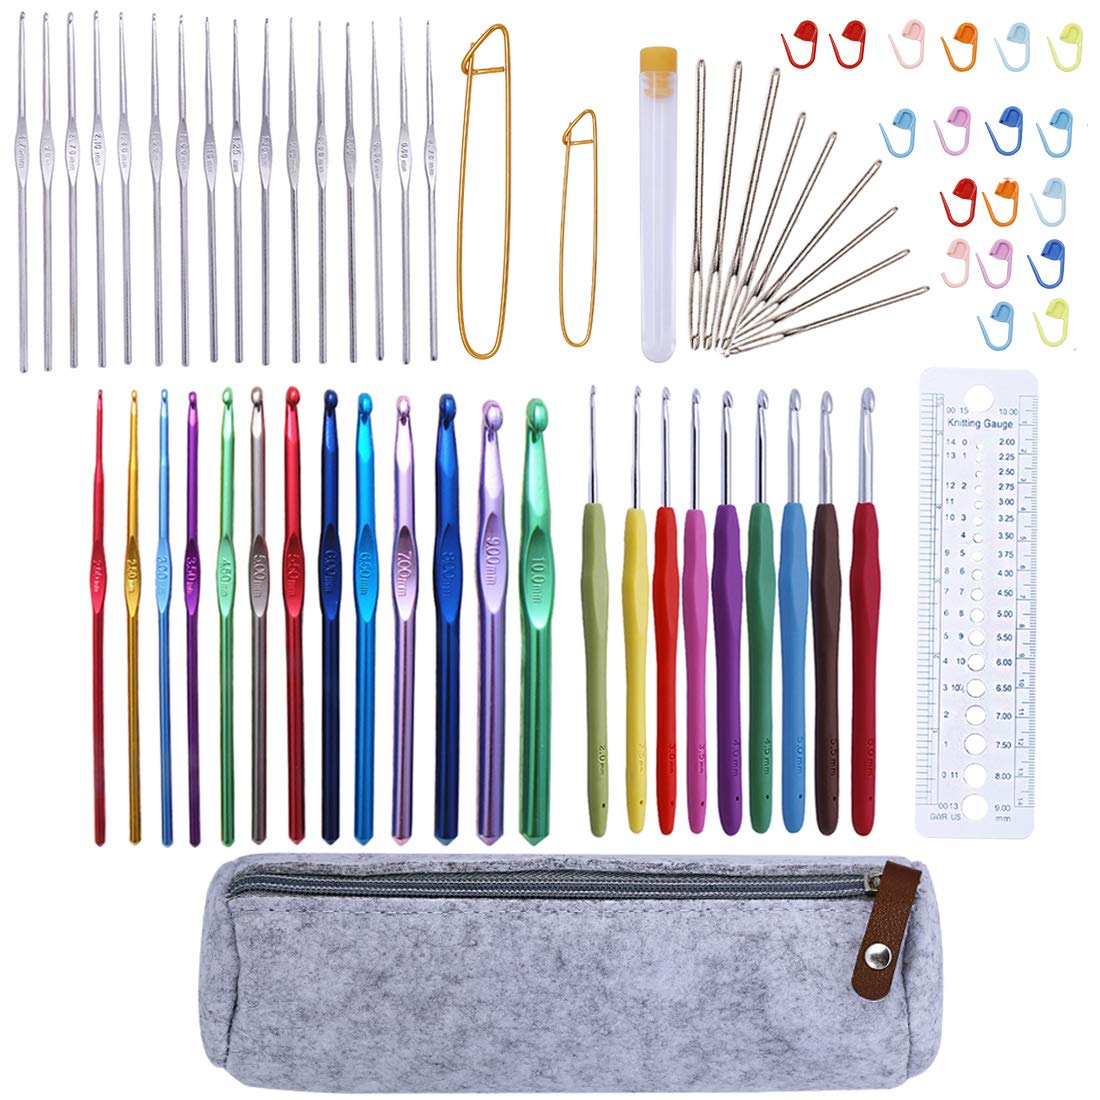 Crochet Hook and Knitting Needle Gauge, Accessories